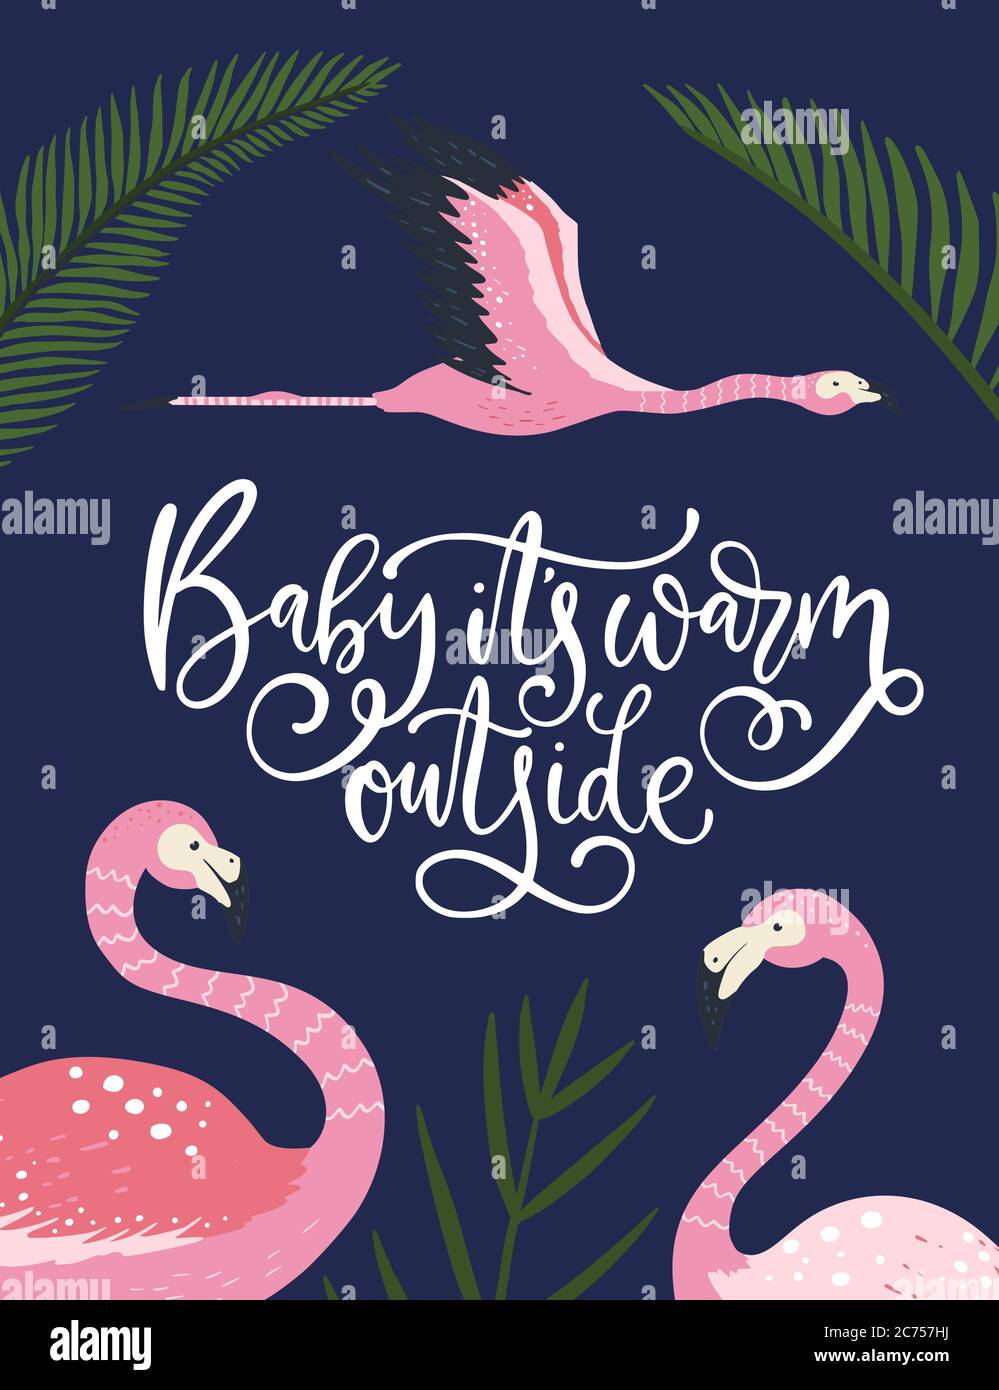 Baby Its Warm Outside Pink Flamingo Birds Vector Card Tropical Cute Summer Poster With Hand Drawn Lettering Quote And Cartoon Kid Illustration Stock Vector Image Art Alamy